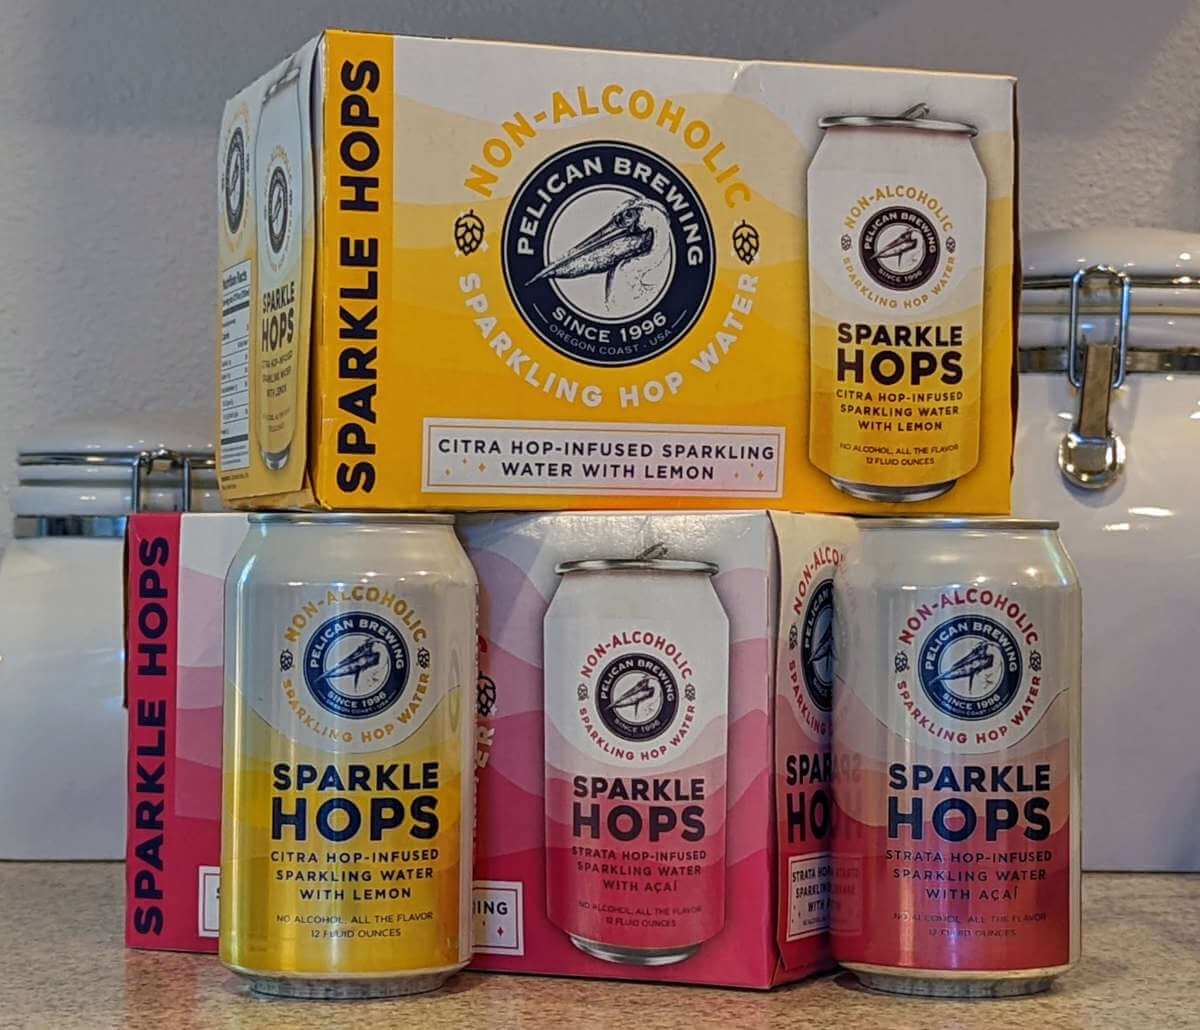 Received: Sparkle Hops, non-alcoholic sparkling hop water from Pelican Brewing